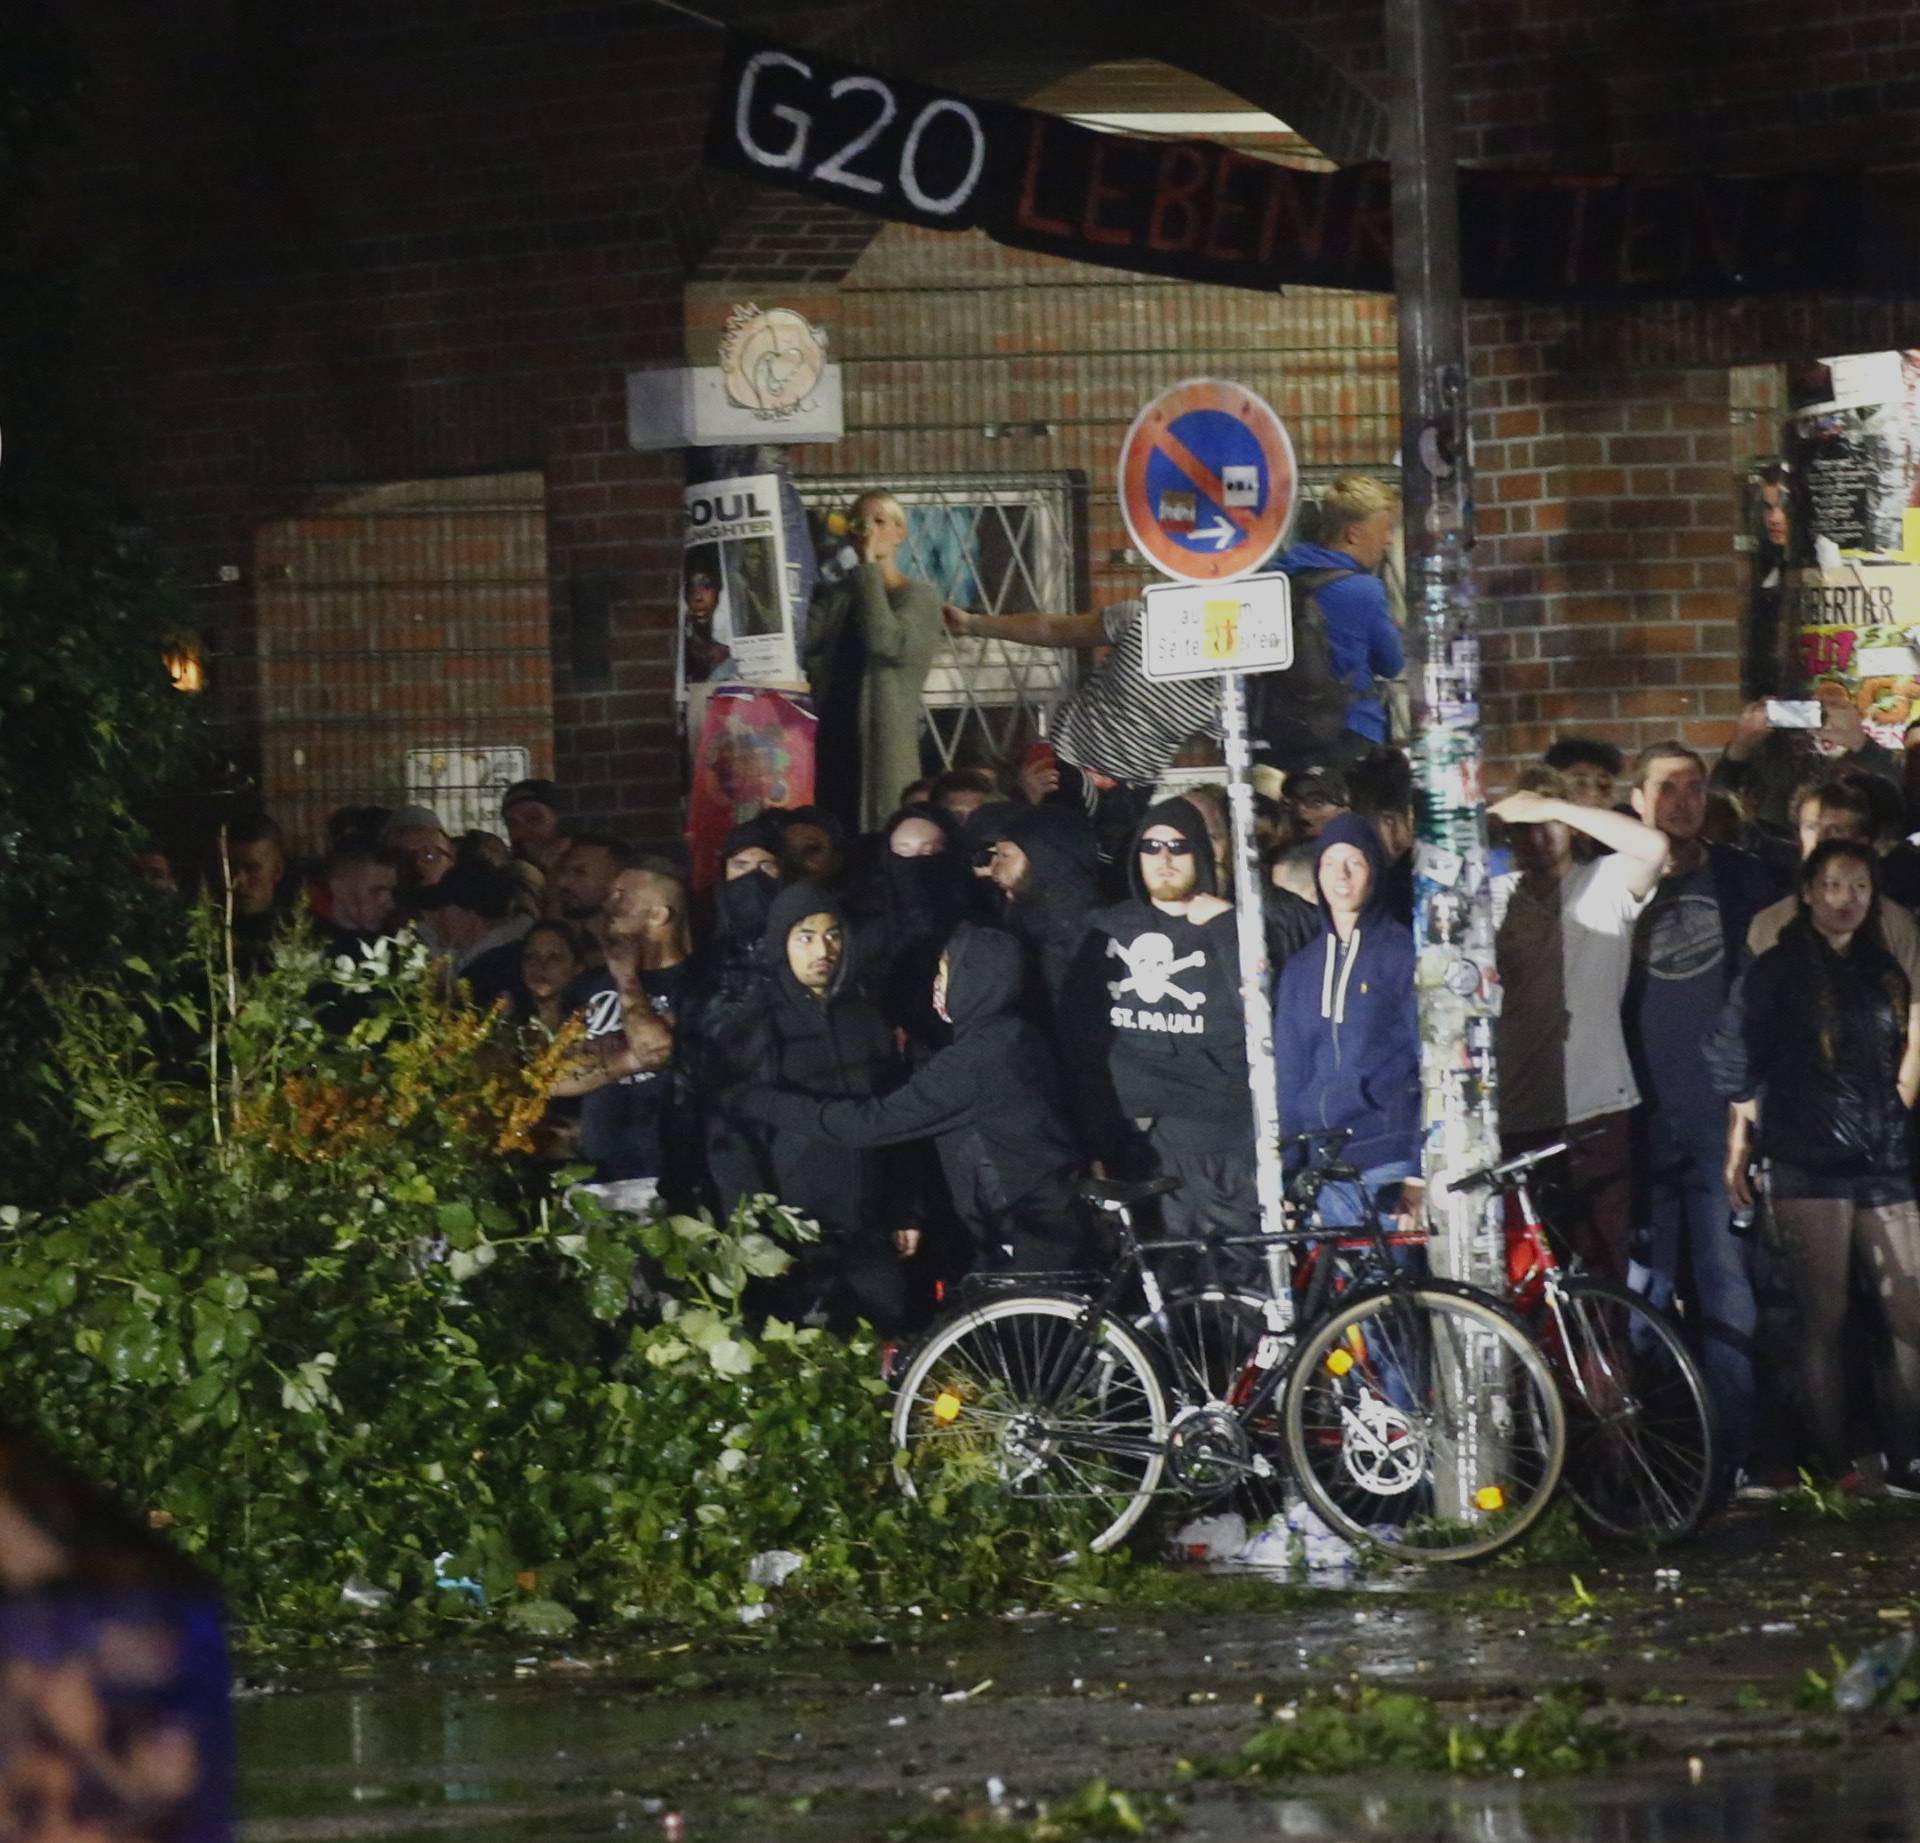 Protestors look for the shelter at the Schanze district following clashes with the police in Hamburg